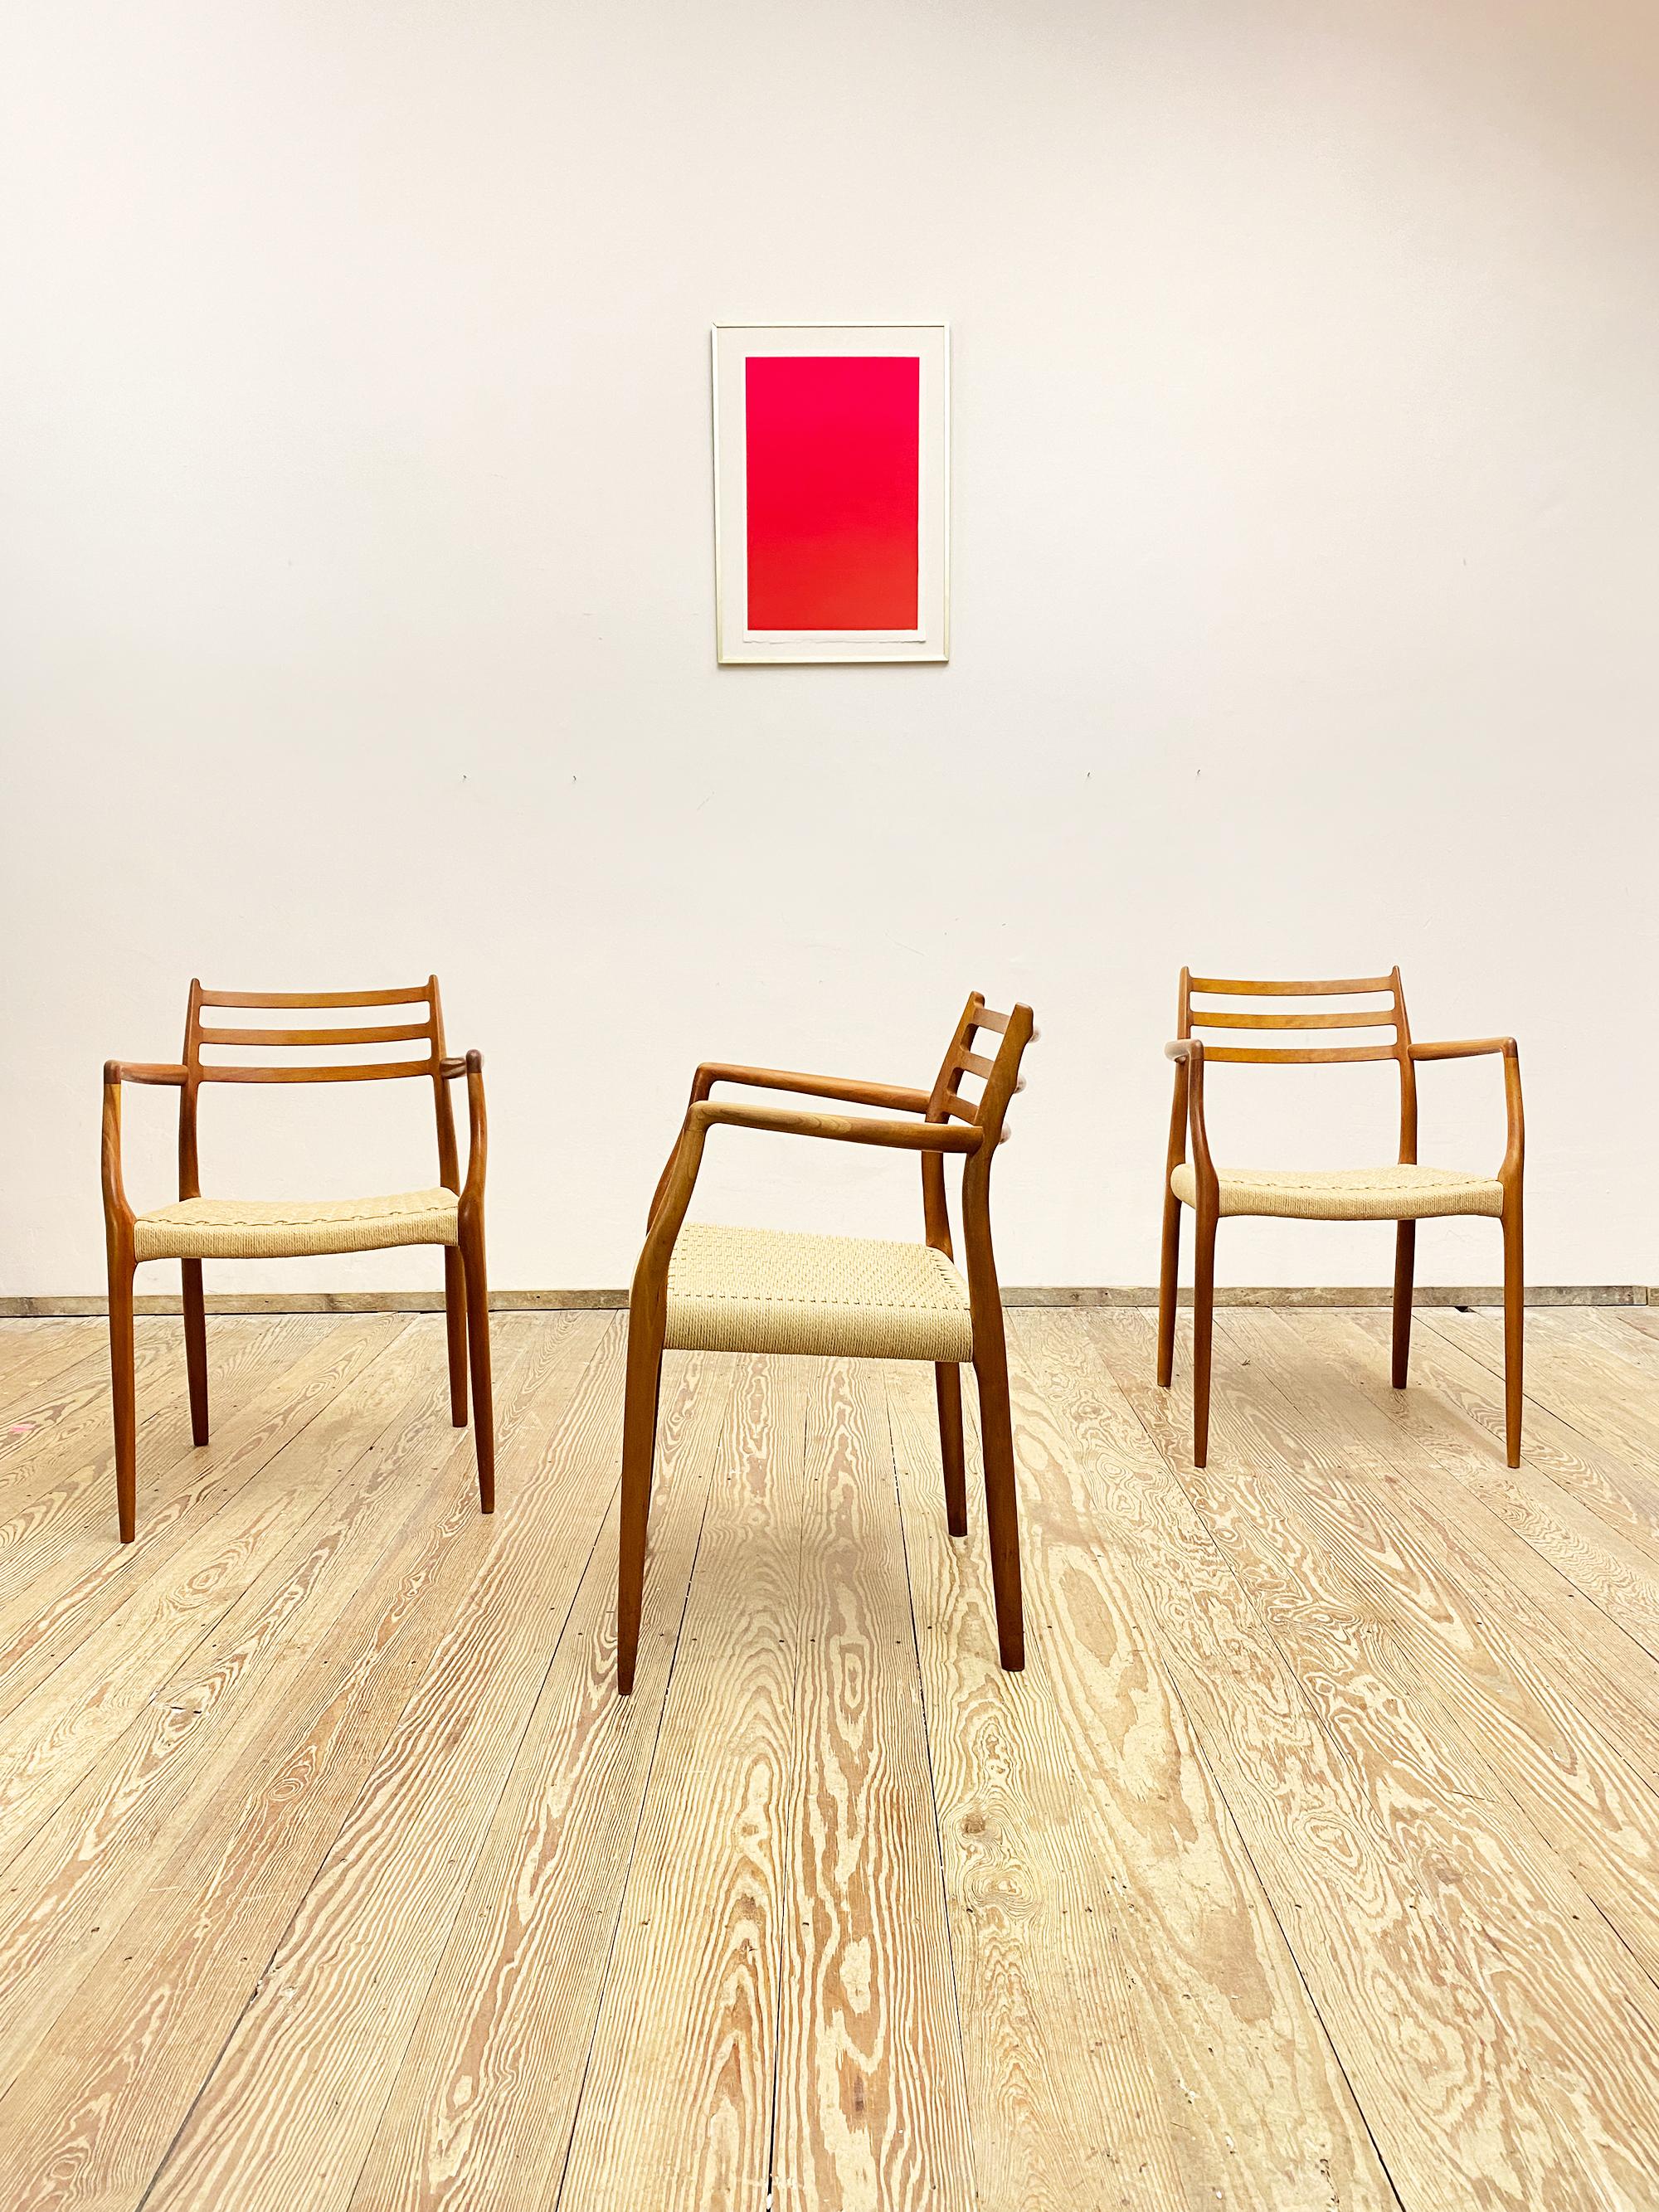 Mid-Century Modern 3 Mid-Century Teak Dining Chairs #62 by Niels O. Møller for J. L. Moller